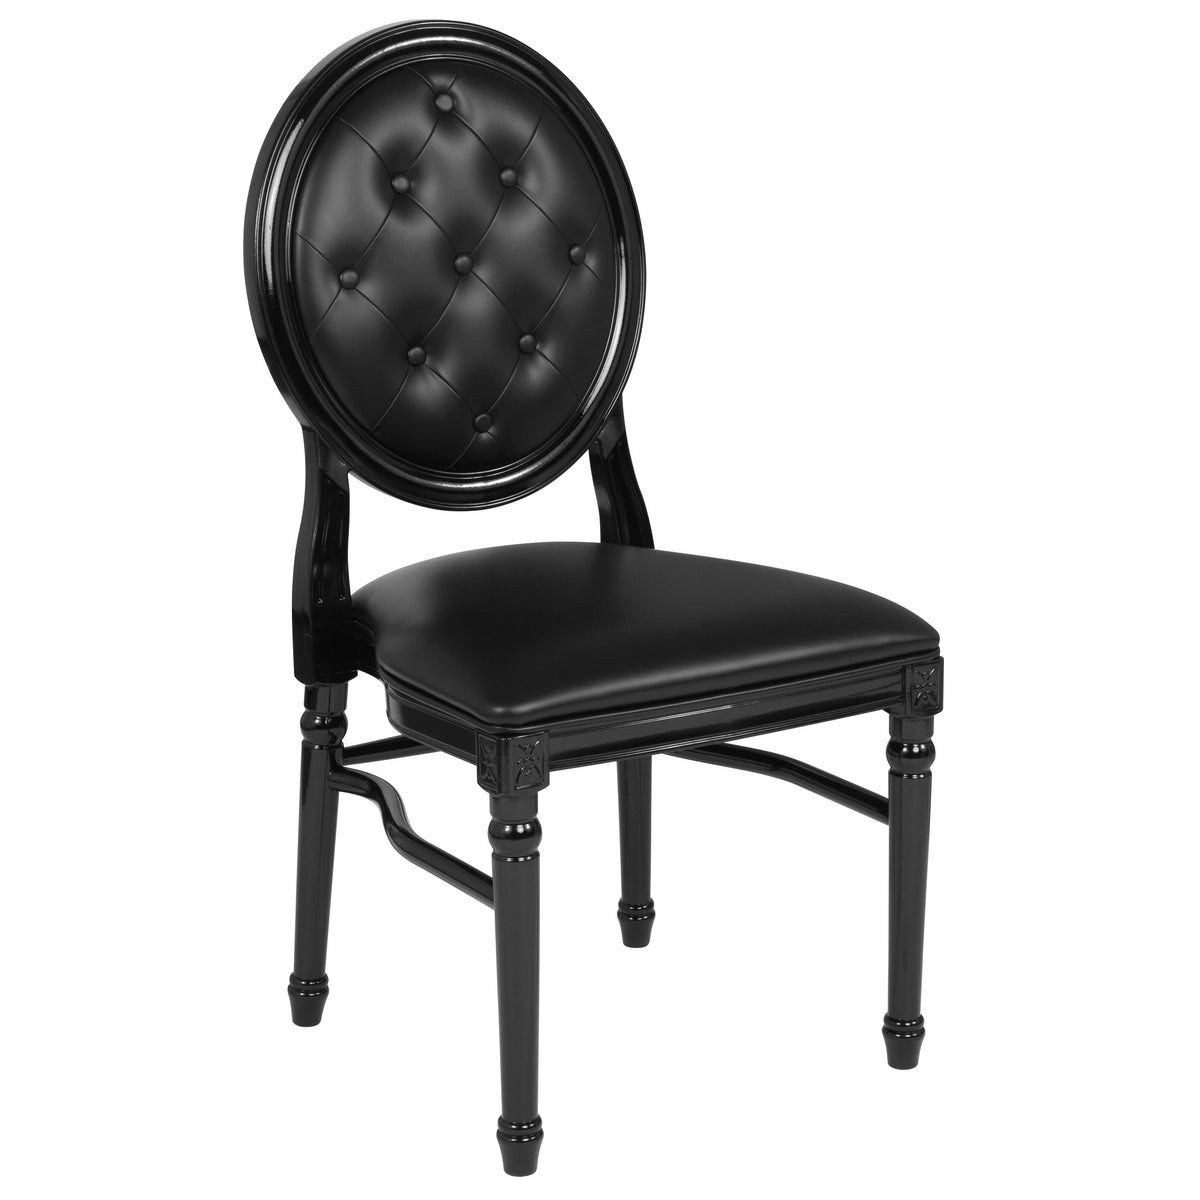 Tufted King Louis Back Arm Chair in Bone